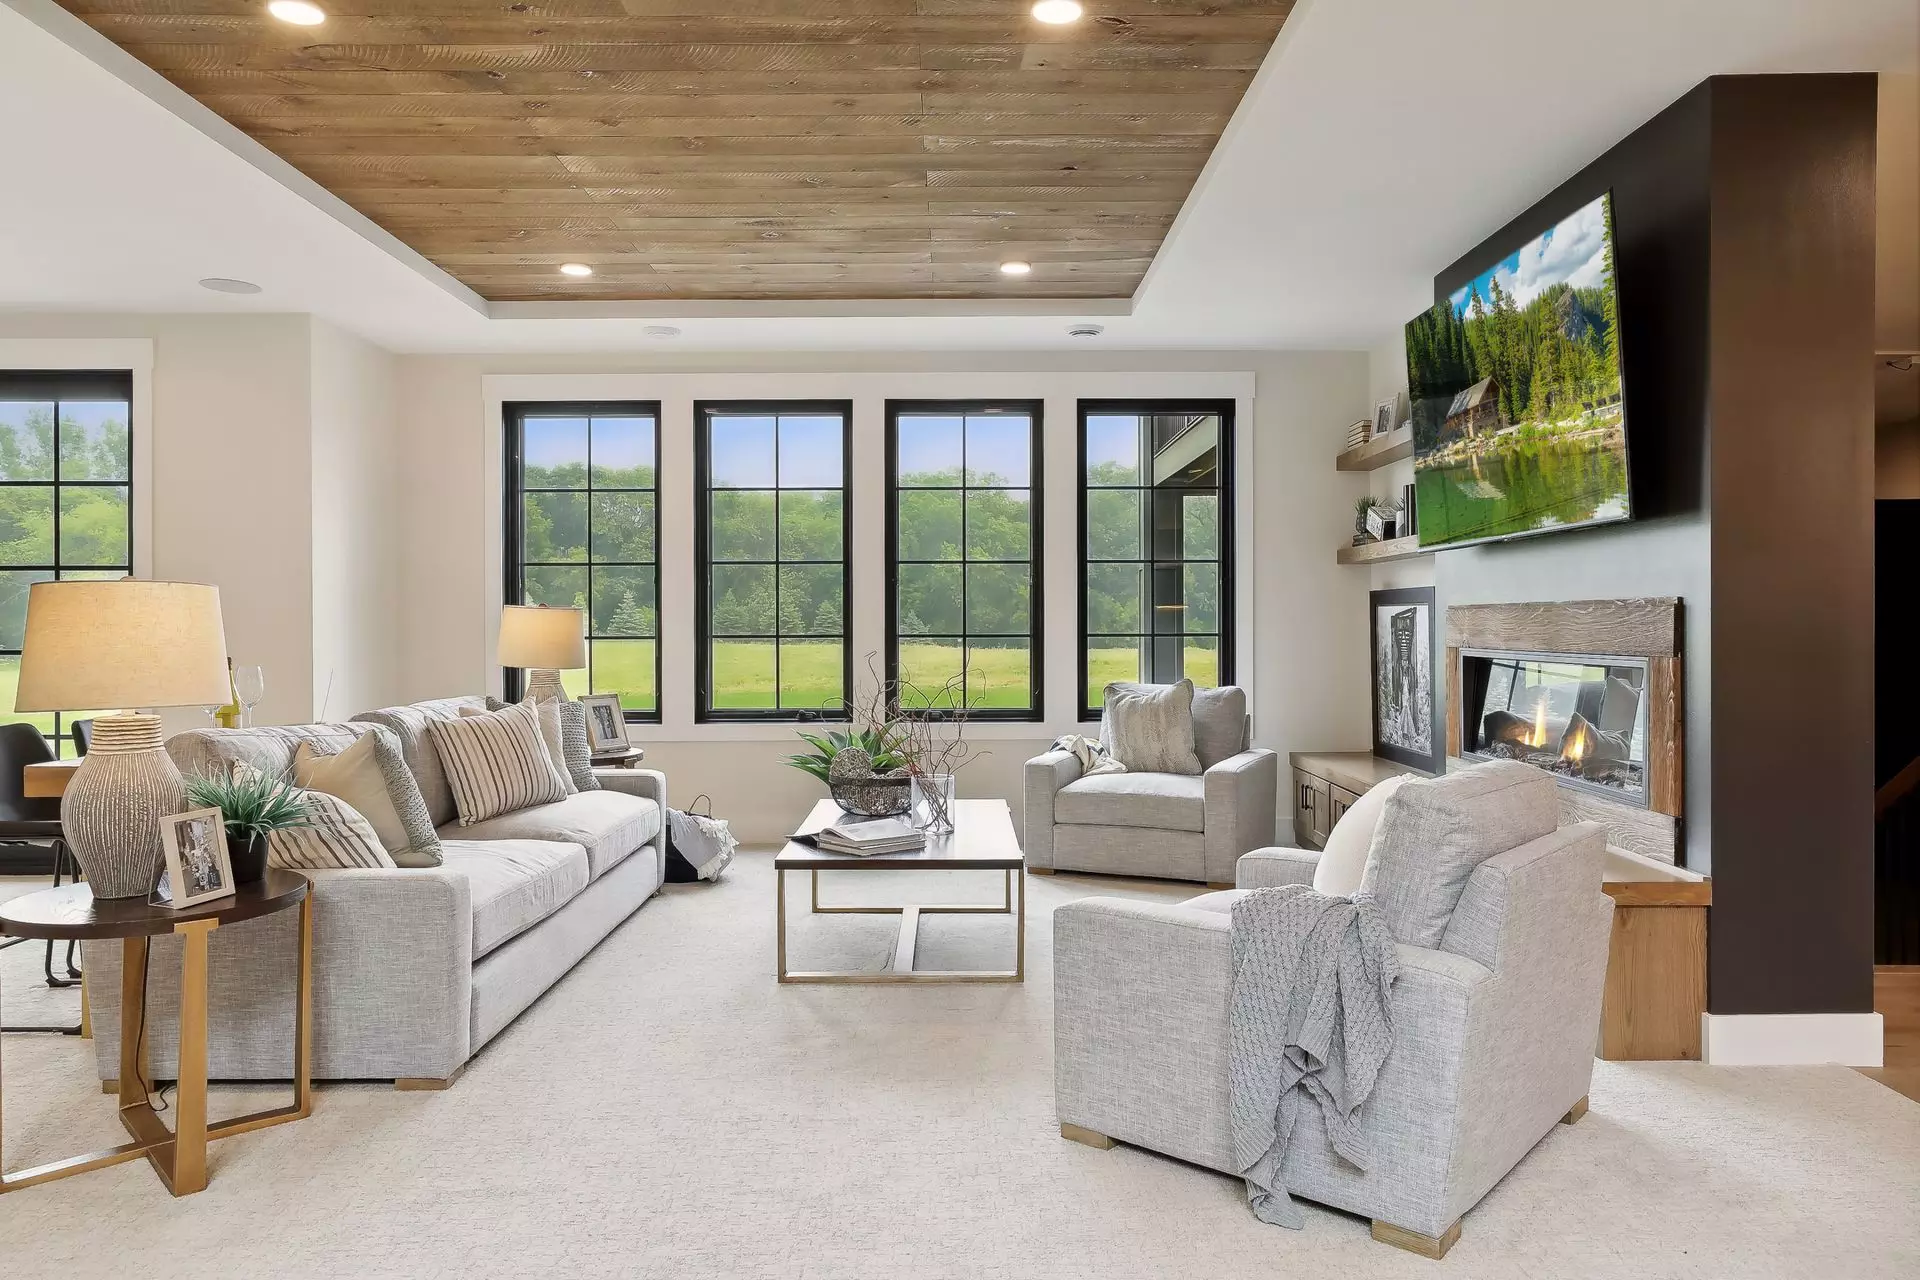 Expansive windows allow for unbeatable panoramic views of Afton Creek Preserve